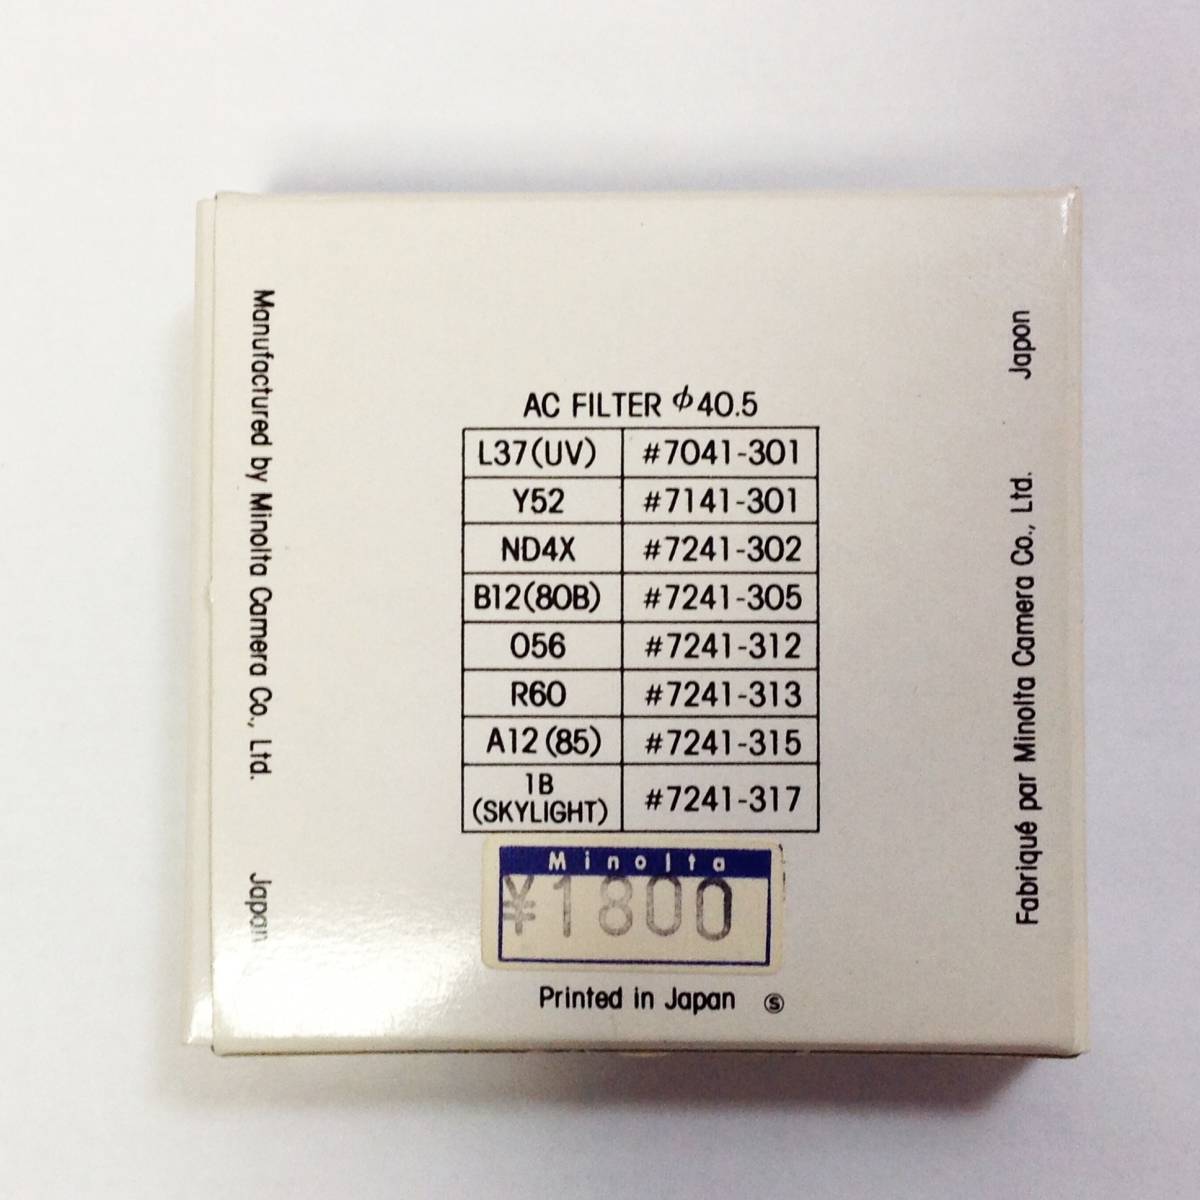 #[MH-6115] unused storage goods MINOLTA Minolta AC FILTER 40.5 lens filter L37(UV) original box attaching that time thing [ click post * all country 185 jpy possible ]